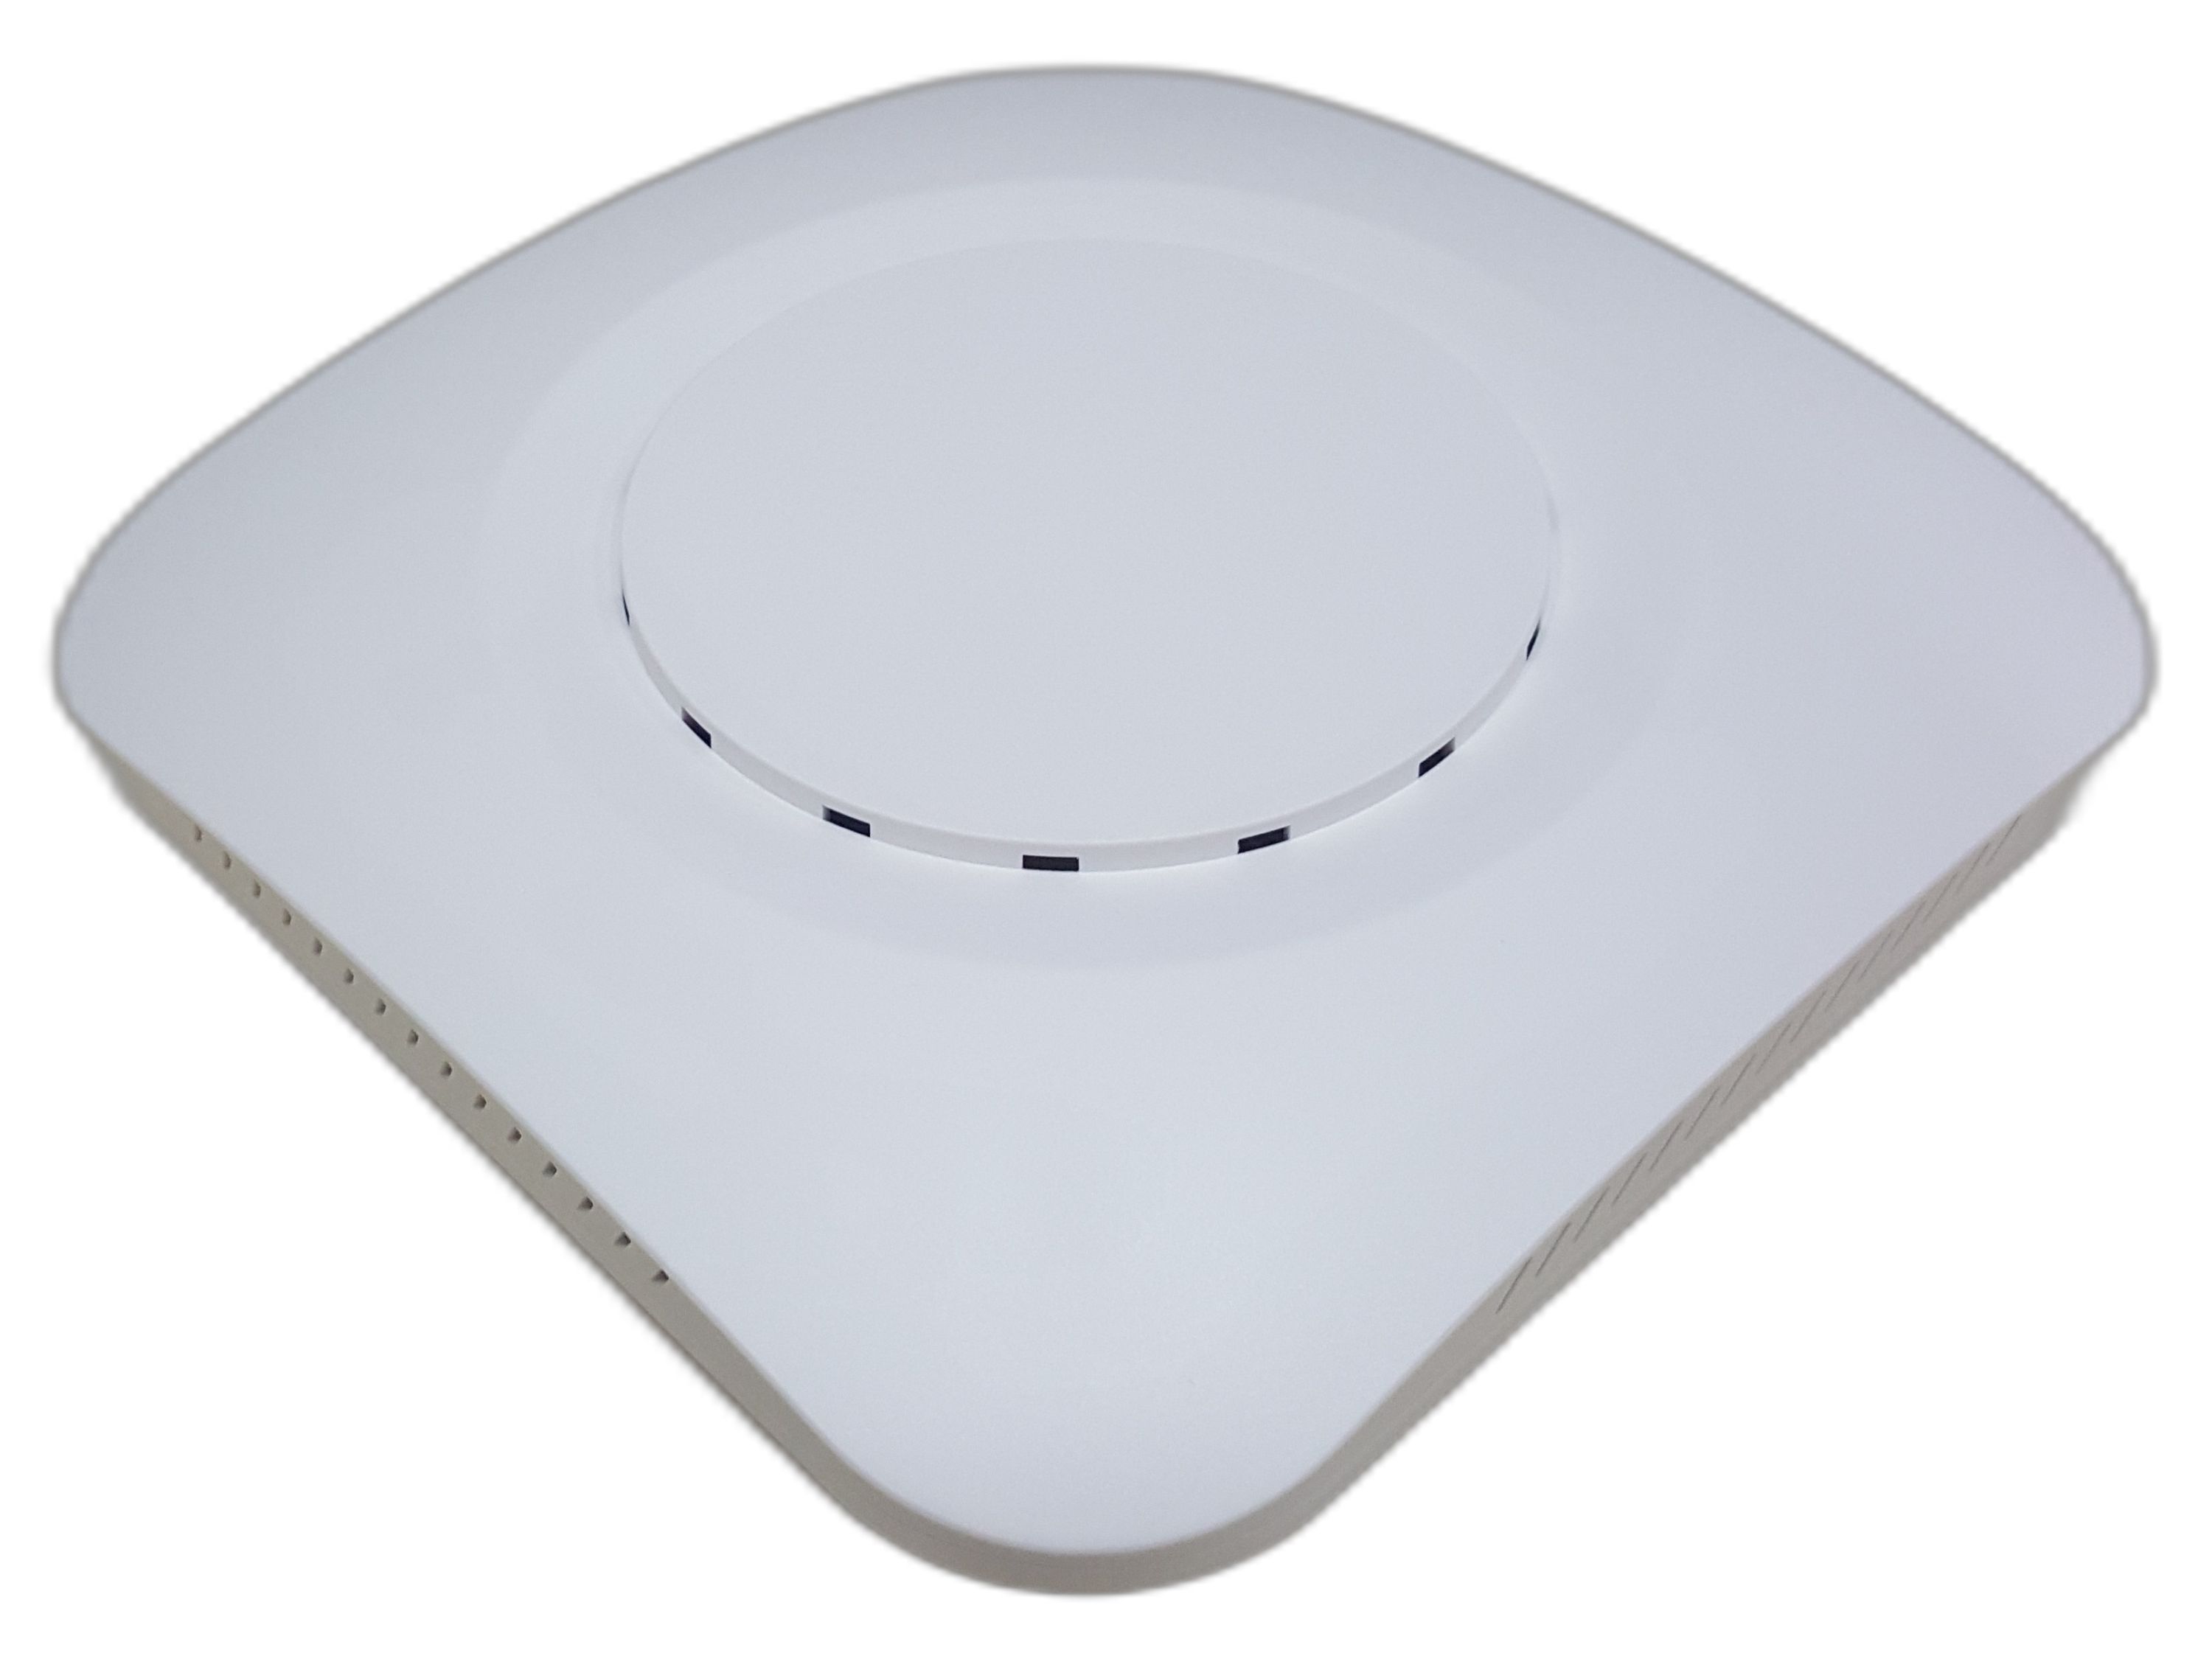 CAP6-1800 Dual Band 1800Mbps Access Point - 2